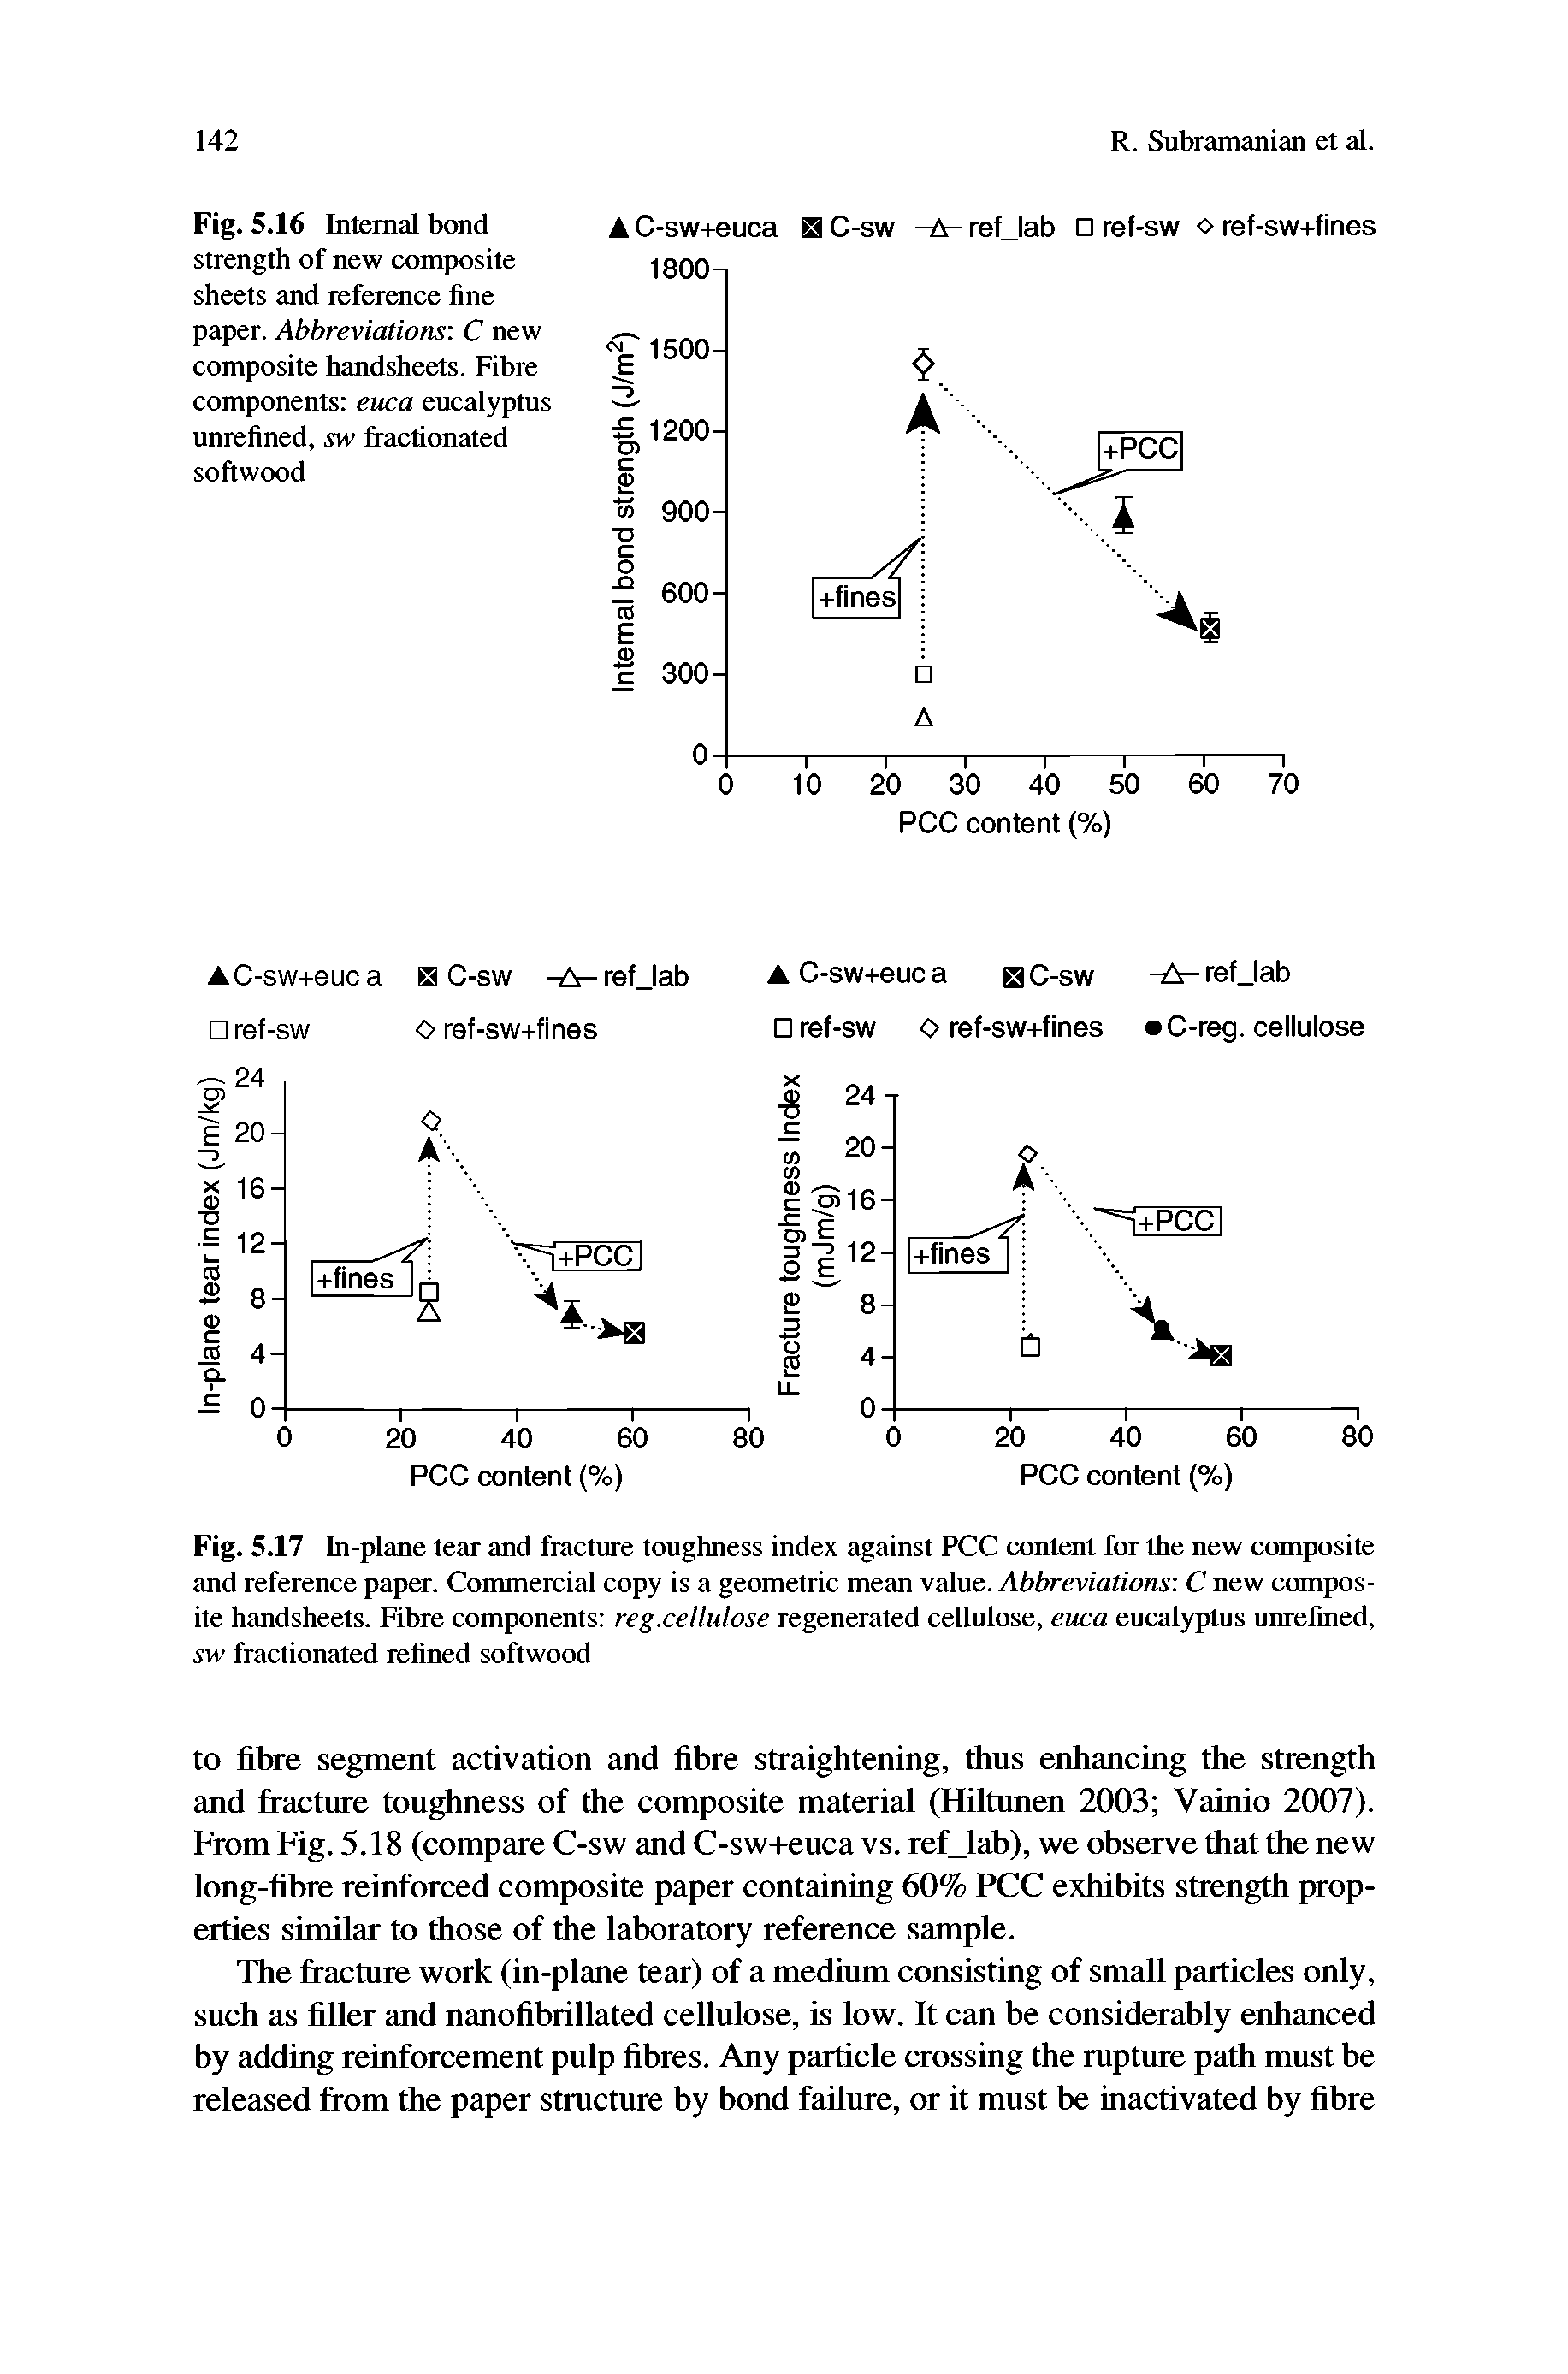 Fig. 5.17 In-plane tear and fracture toughness index against PCC content for the new composite and reference paper. Commercial copy is a geometric mean value. Abbreviations C new composite handsheets. Fibre components reg.cellulose regenerated cellulose, euca eucalyptus unrefined, sw fractionated refined softwood...